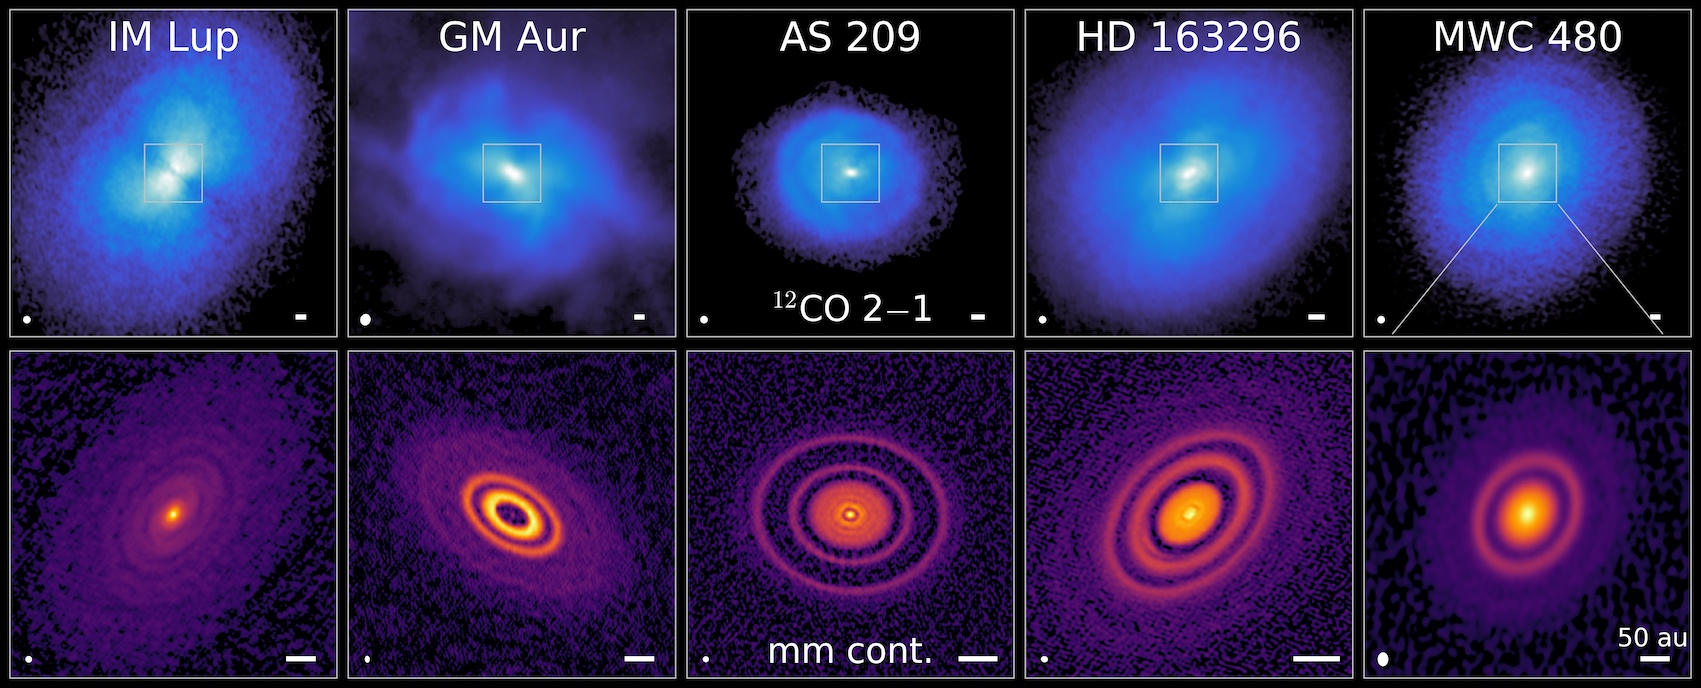 12CO 2-1 integrated intensity maps (top row) and millimeter continuum images (bottom row).